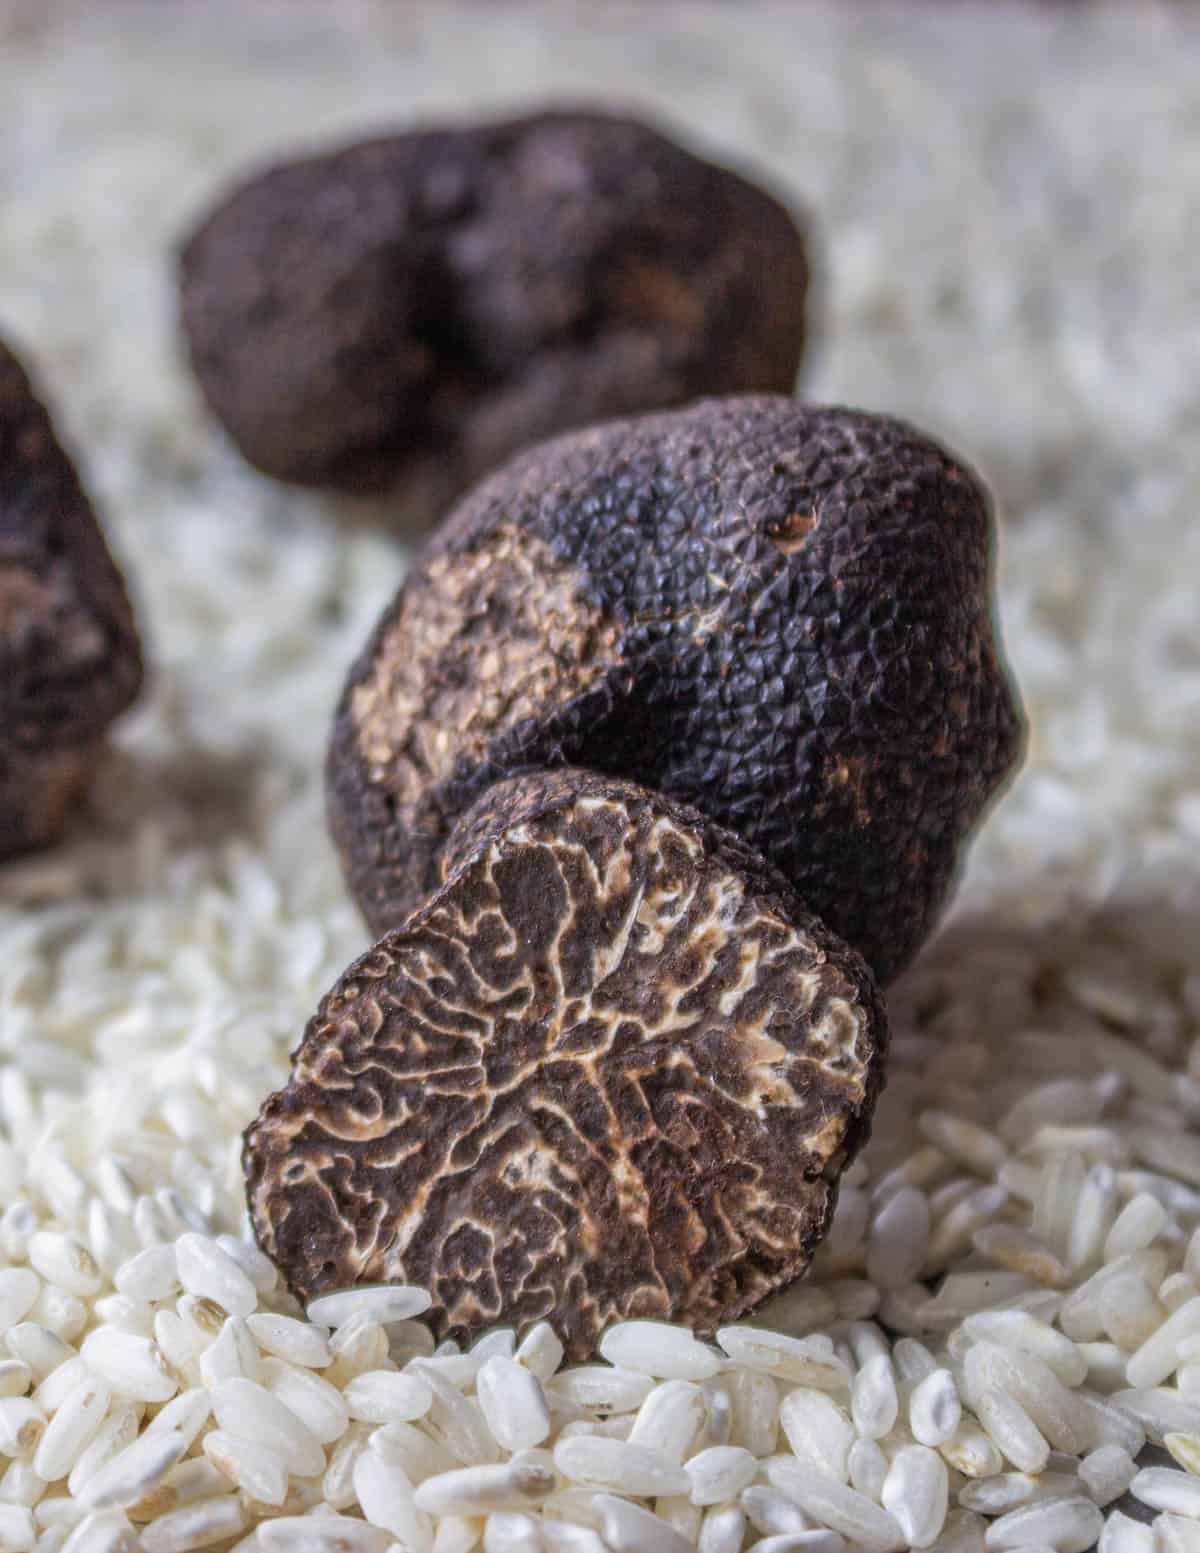 Tuber brumale black truffles cut in half to show the internal pattern, arranged on a pile of risotto rice before cooking. 